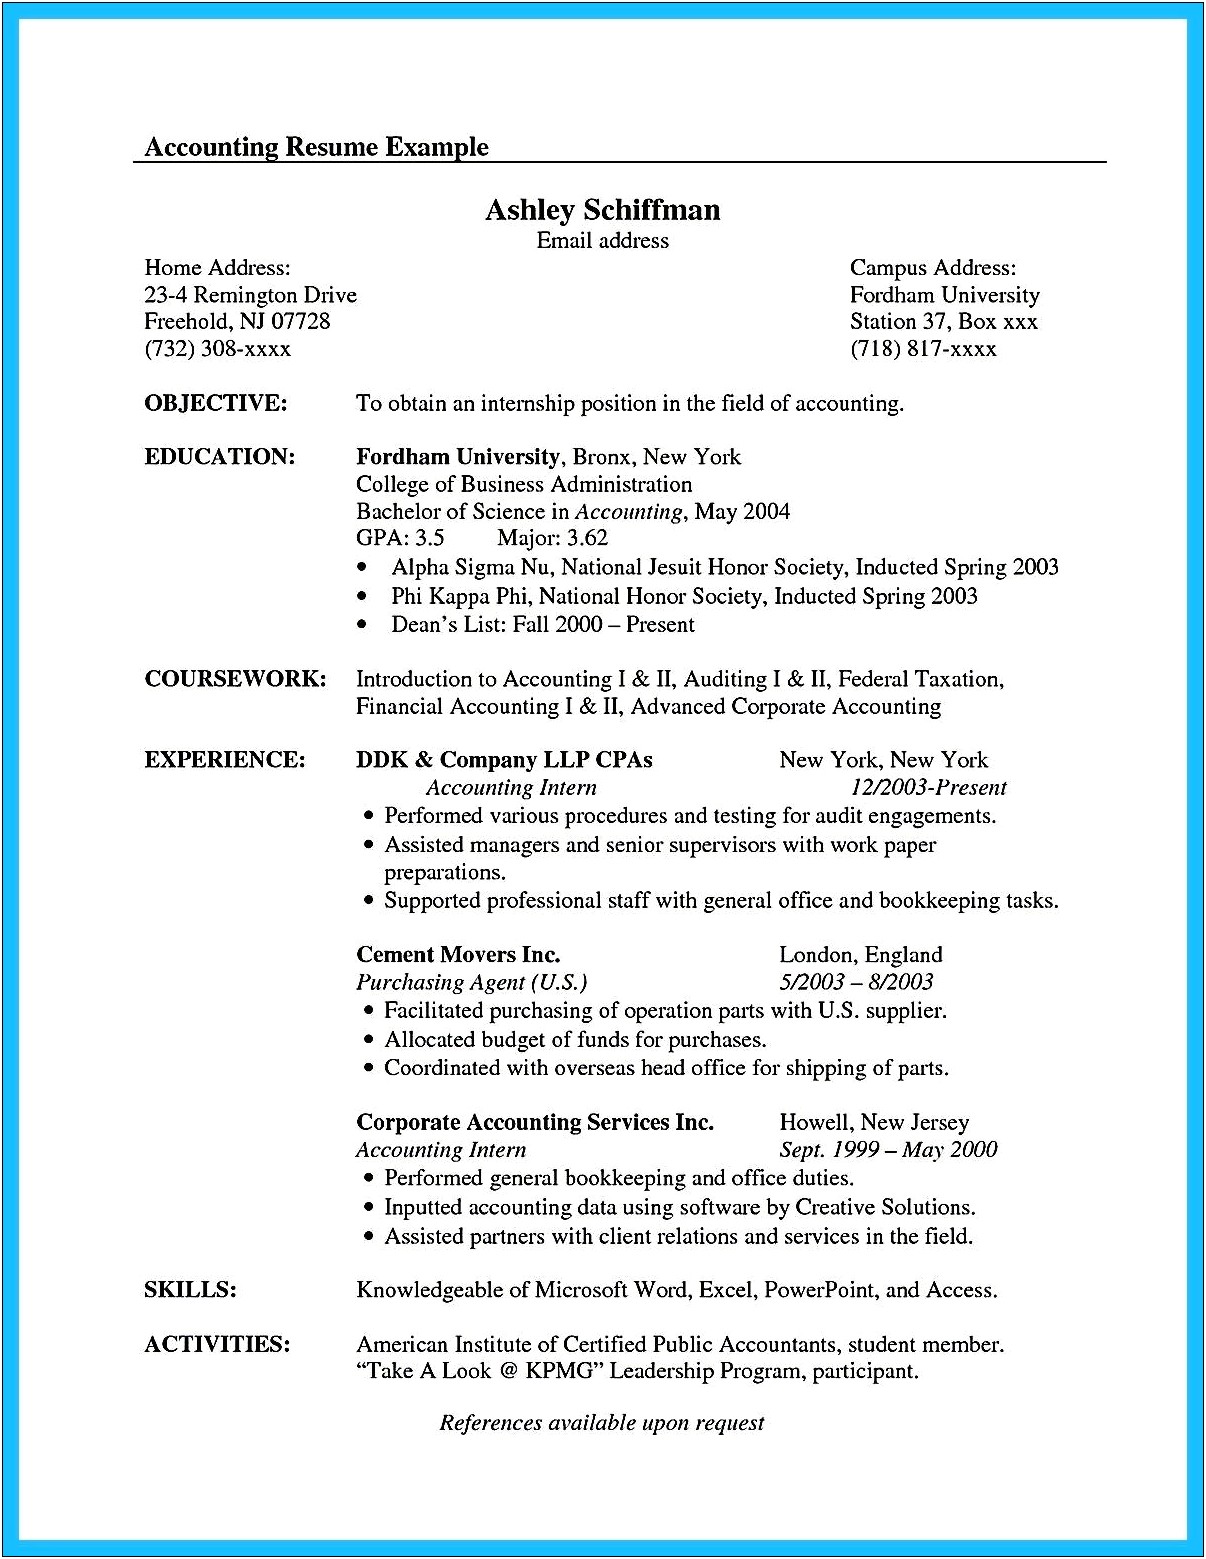 Recent Accounting Graduate Resume Objective